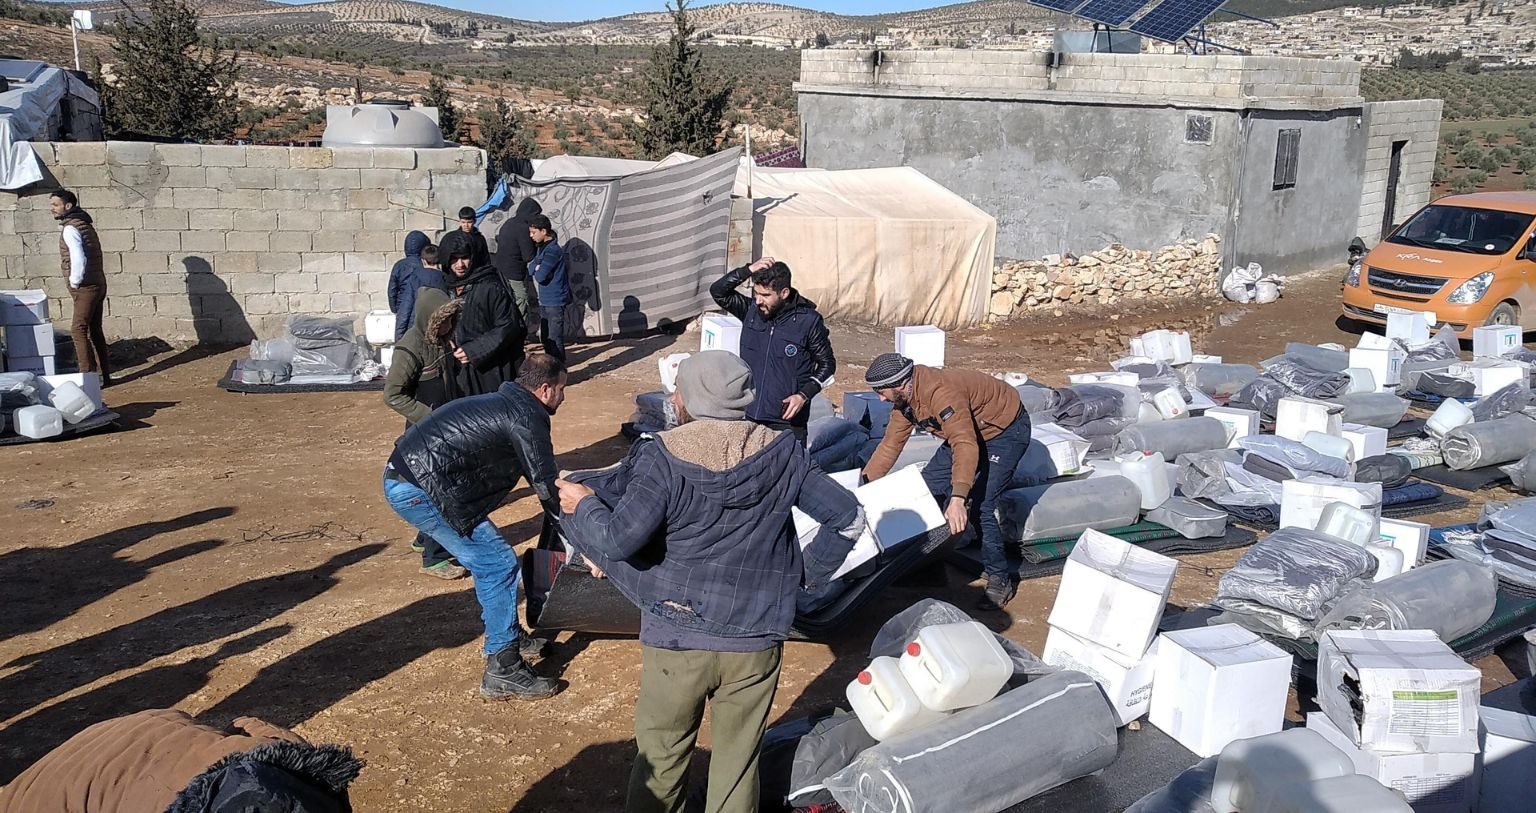 MSF team in #Syria delivered, yesterday,  the first 270 kits with non-food items including hygiene items, kitchen kits, winter kits and blankets, in Jandaris area